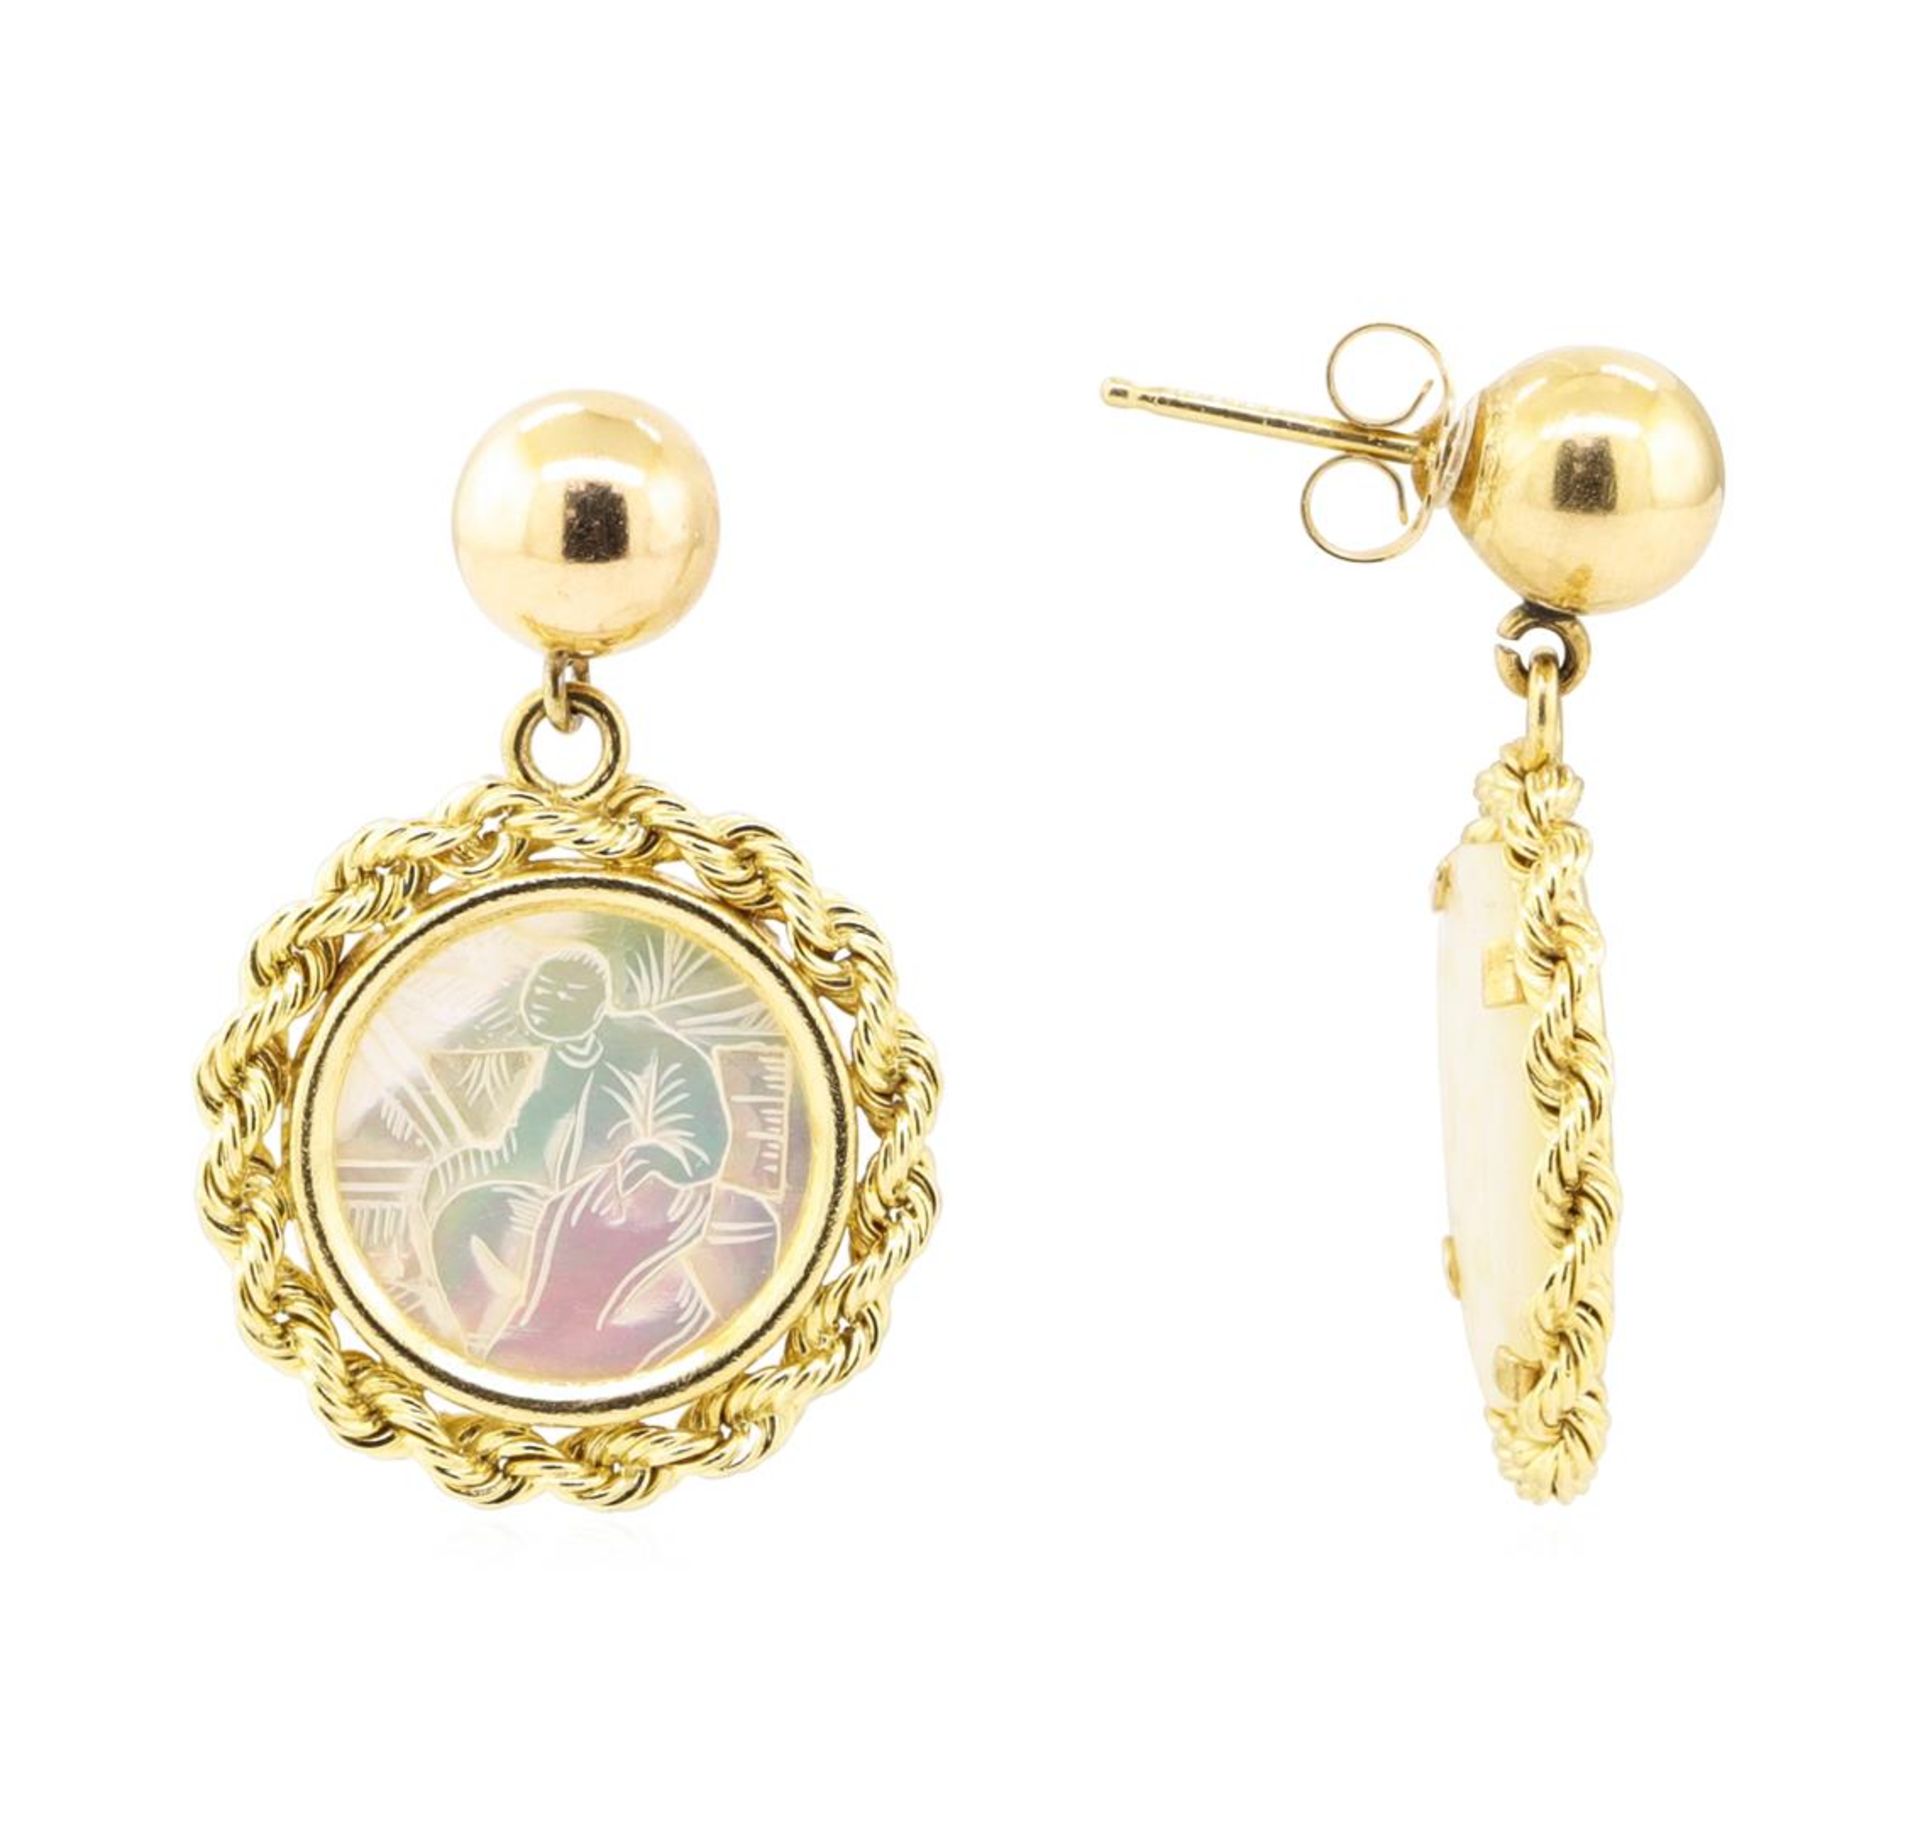 Mother of Pearl Coin Earrings - 14KT Yellow Gold - Image 2 of 2